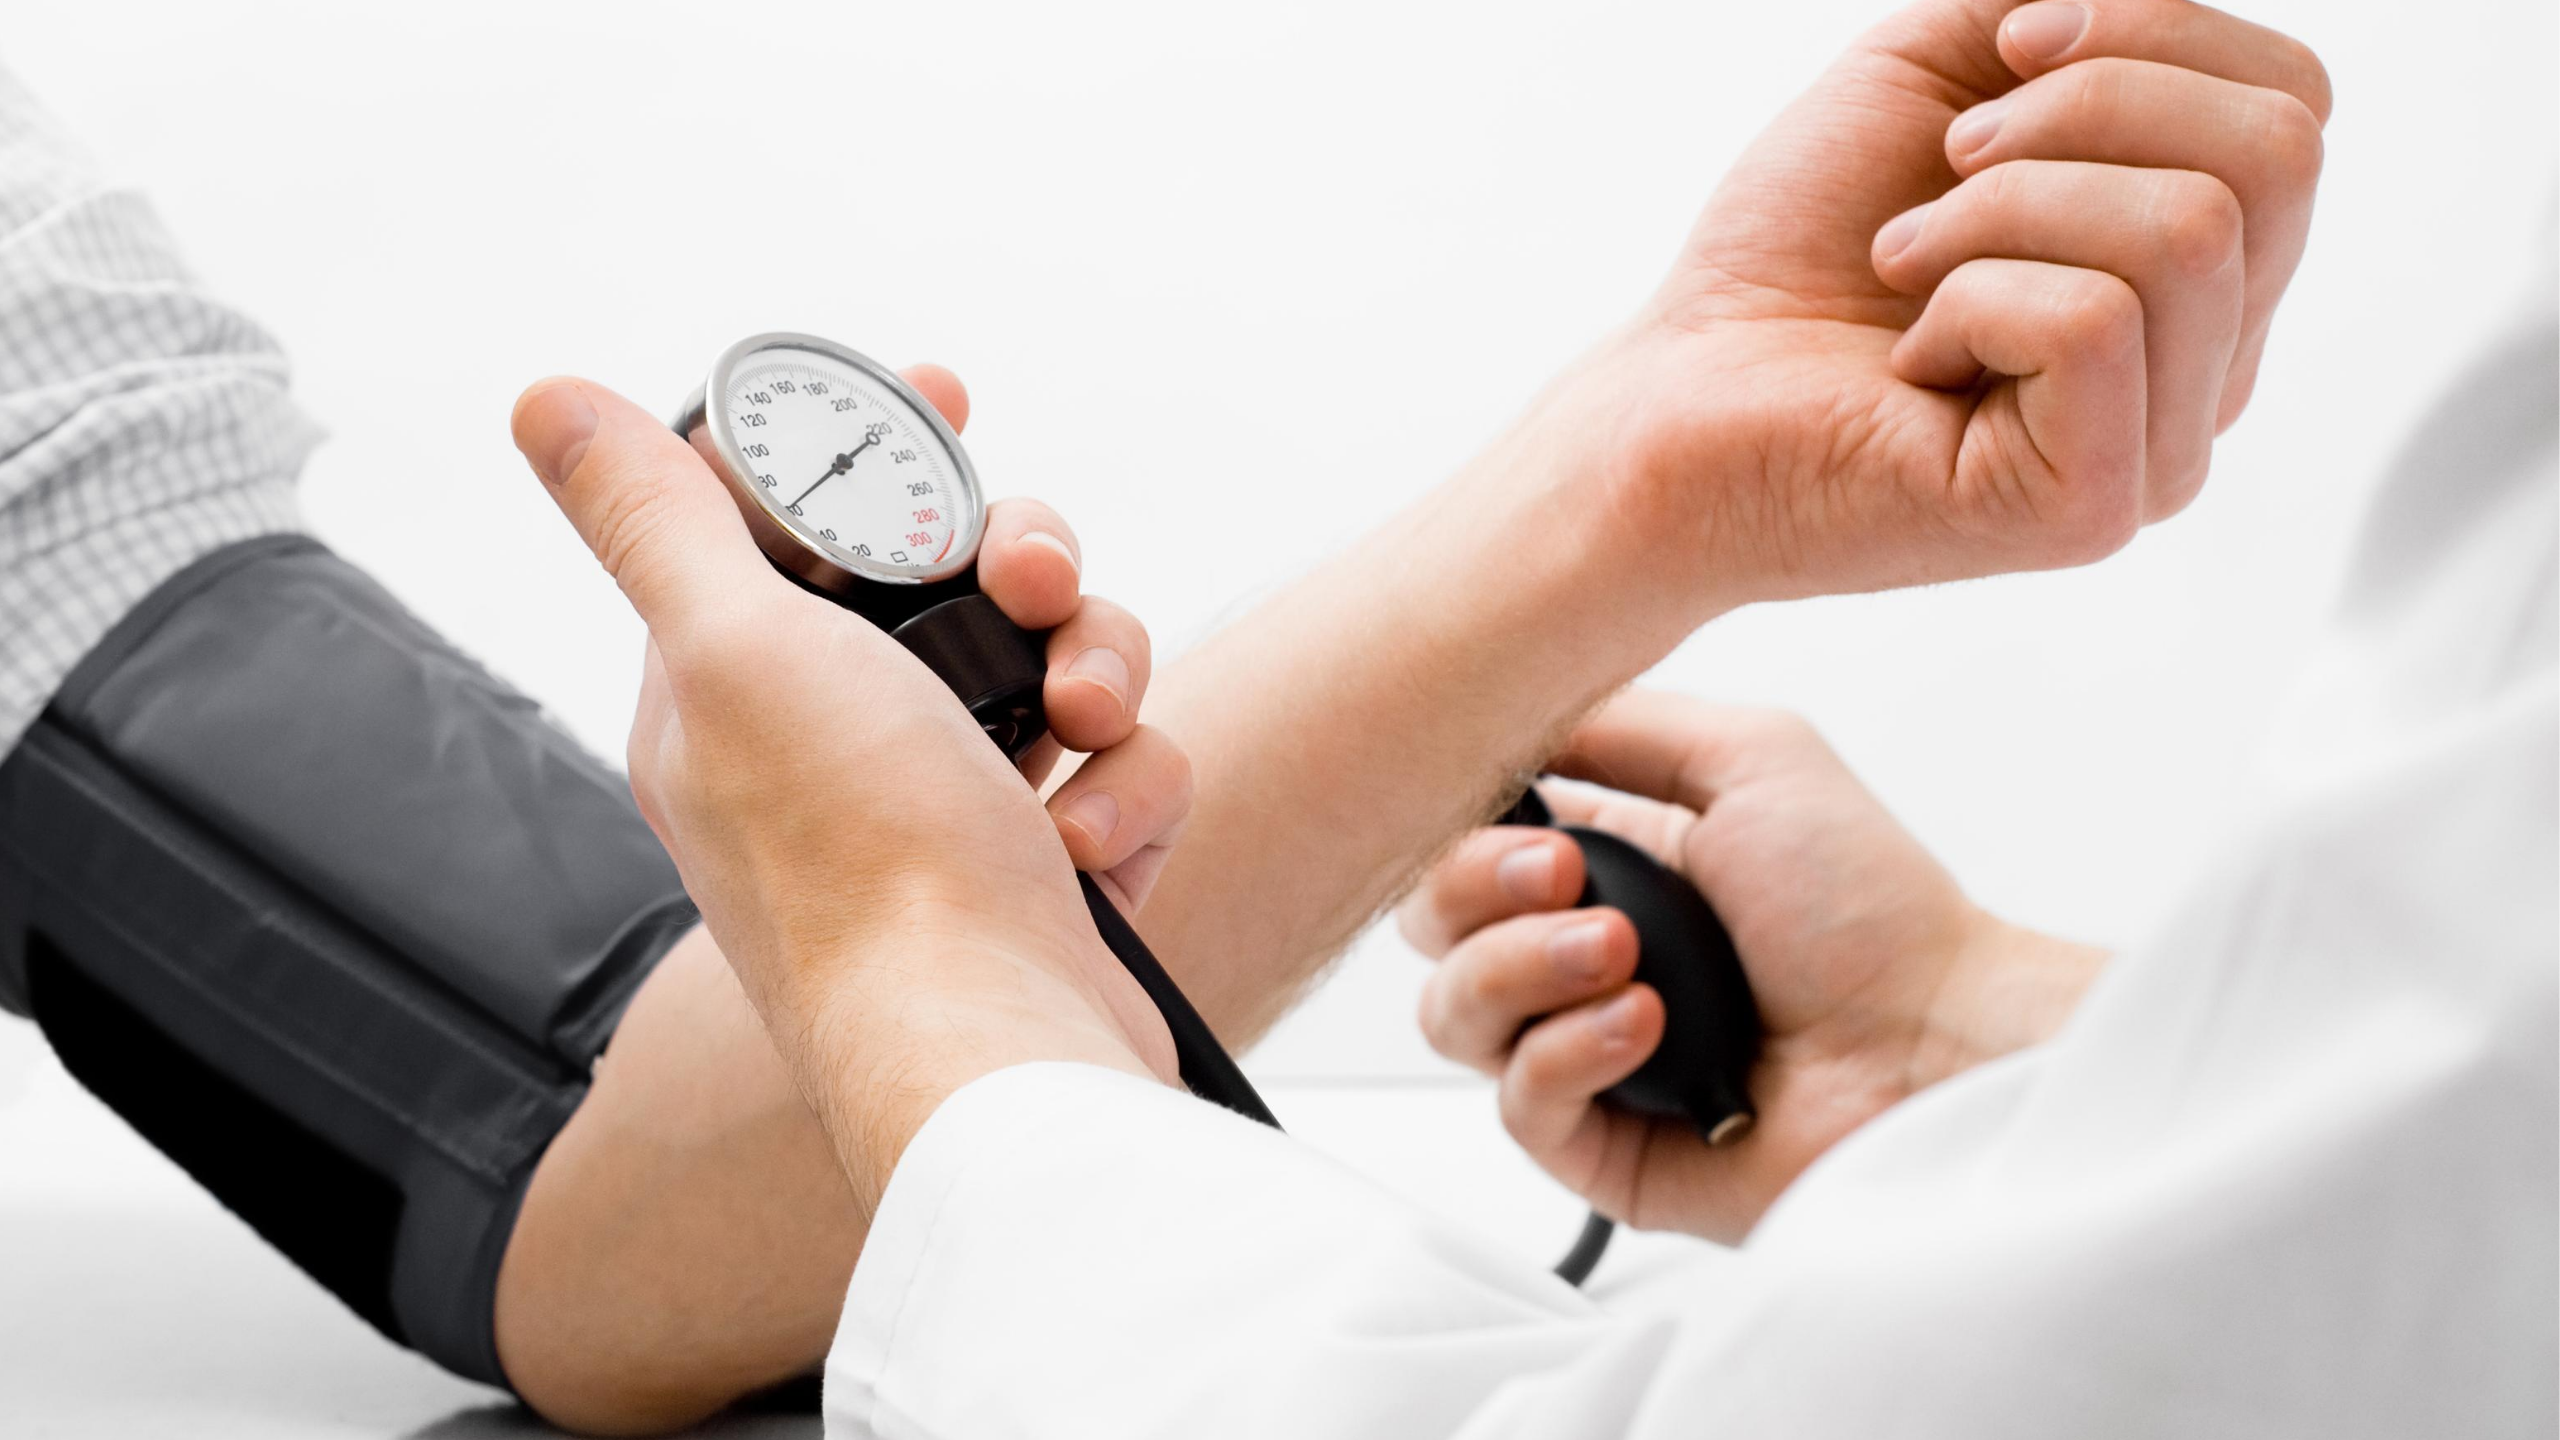 measuring blood pressure with a stethoscope